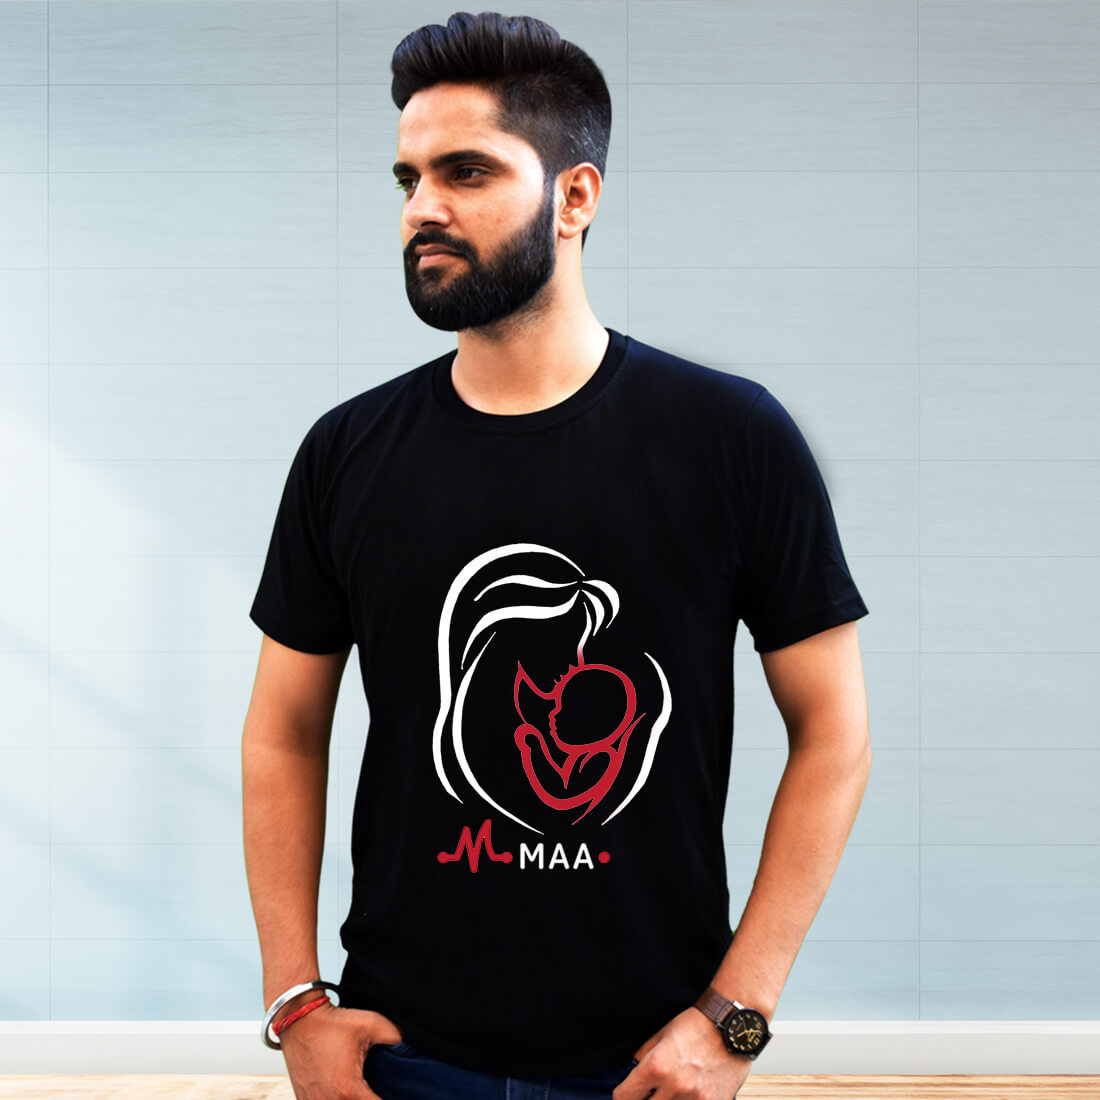 Mother and Son Sketch Printed Black T-Shirt for Men